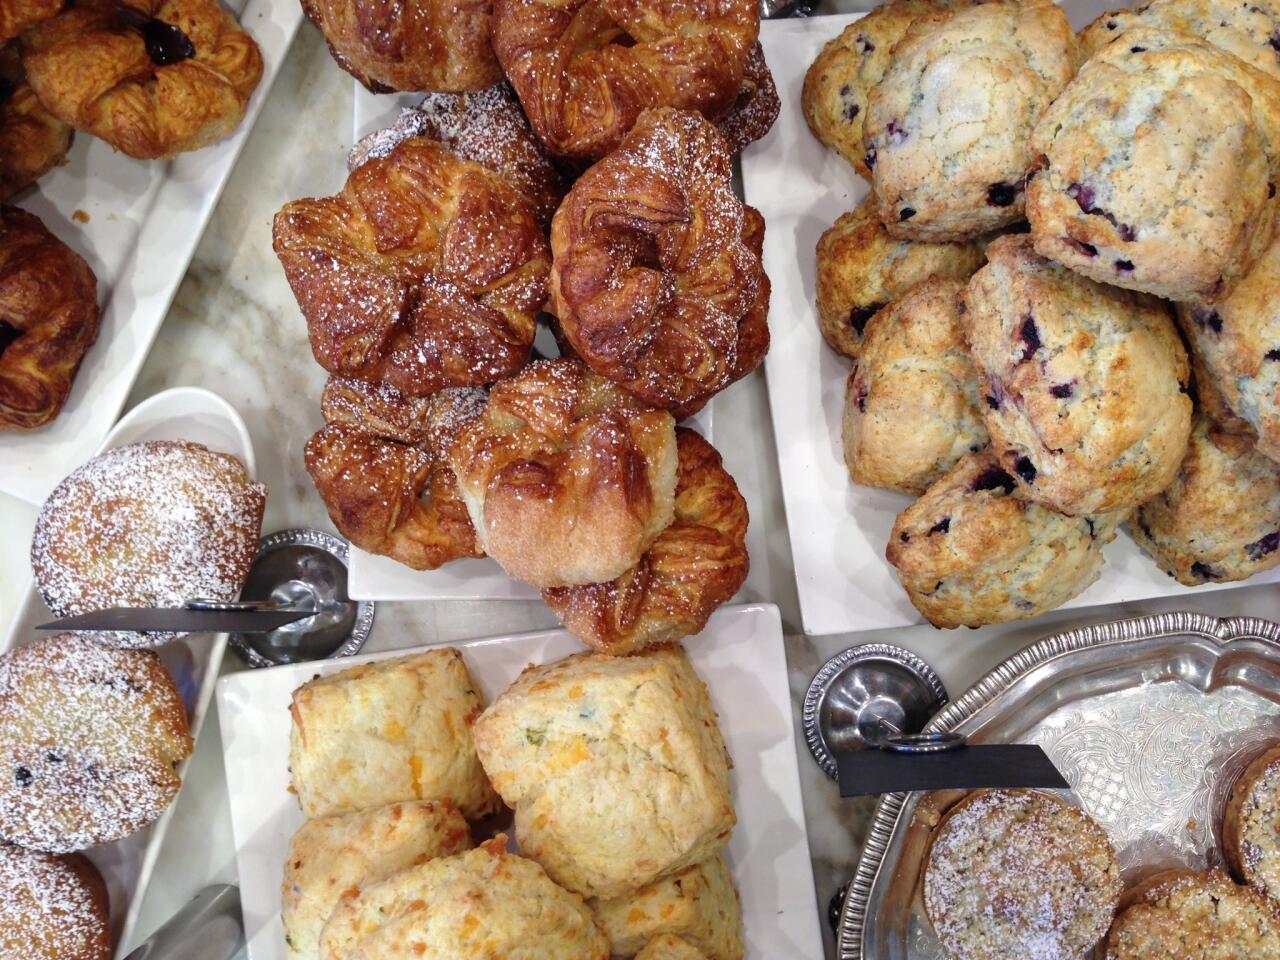 Viennoiserie and morning pastries at b. patisserie in San Francisco. Check out the kouign amann second from left at top.